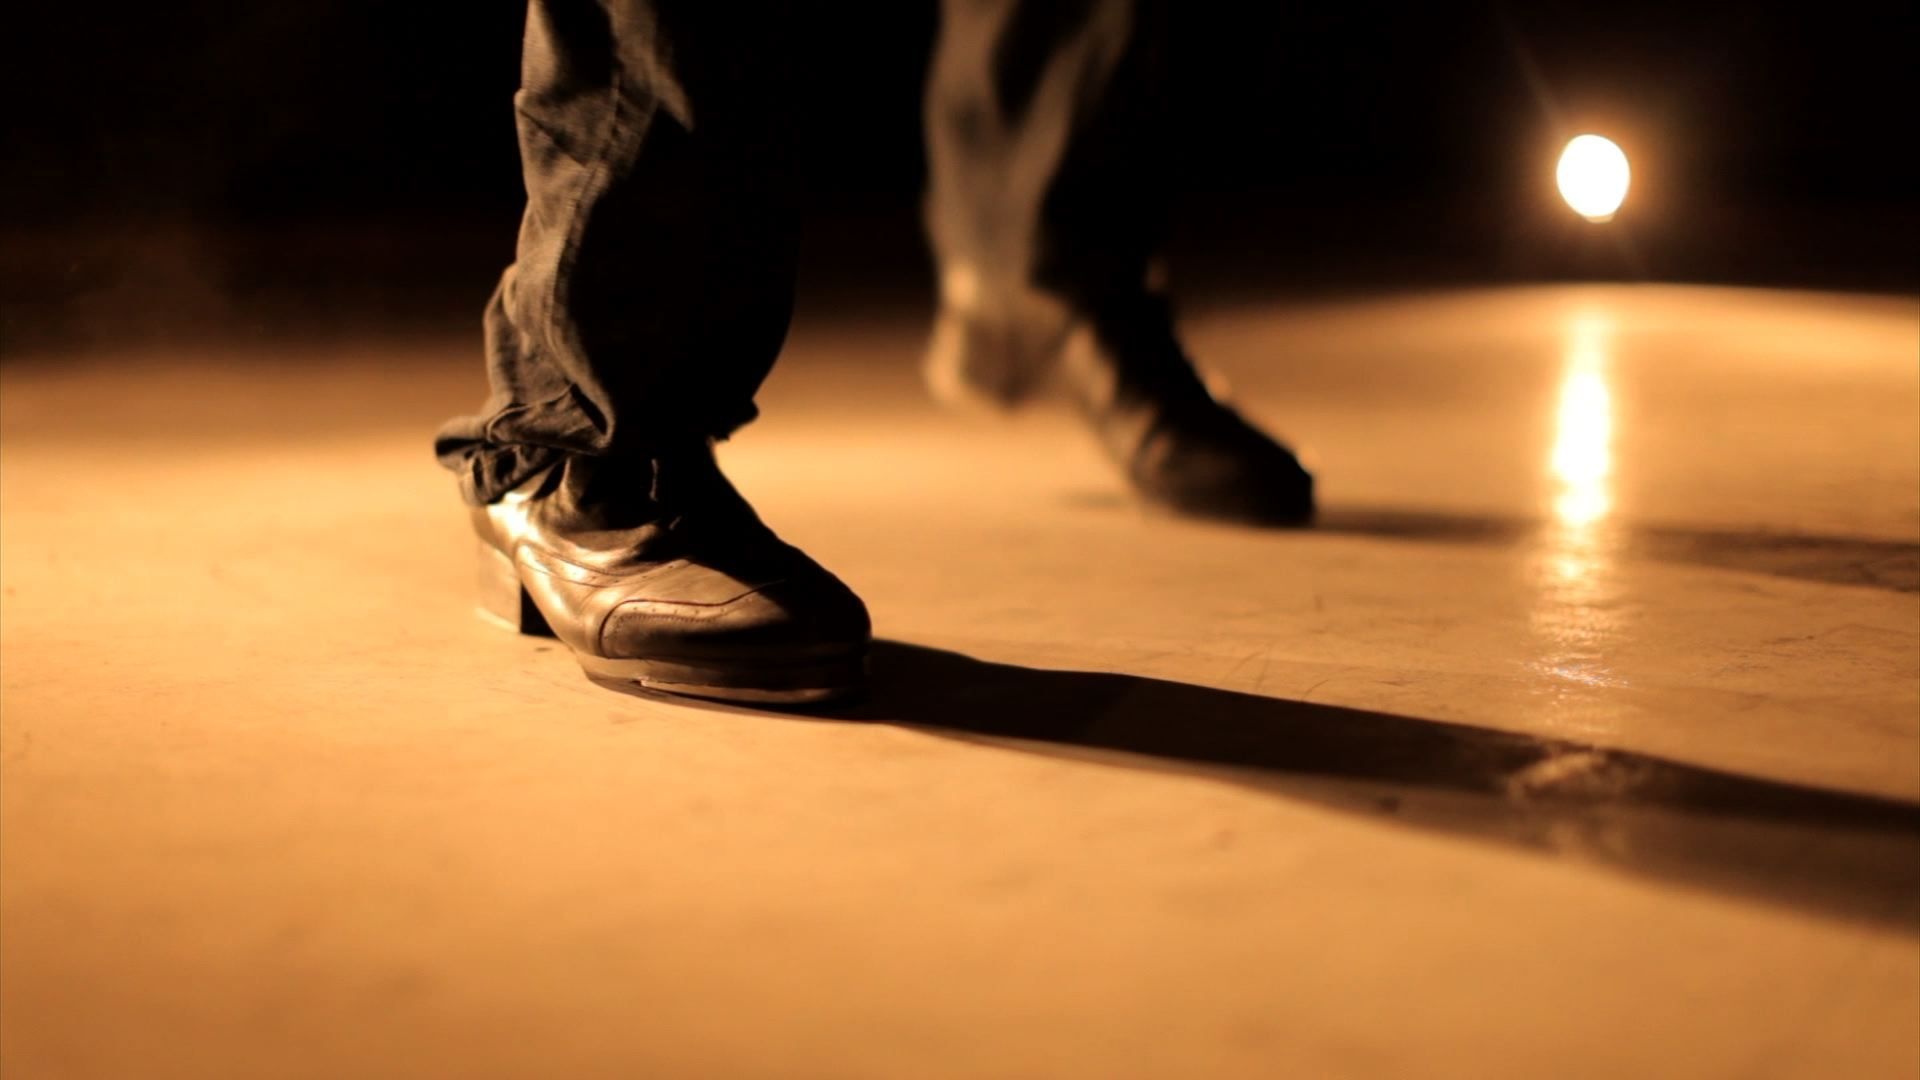 Tap Dance: Rhythm on the dance floor, The sounds of tap shoes striking the floor, legs as art instrument. 1920x1080 Full HD Wallpaper.